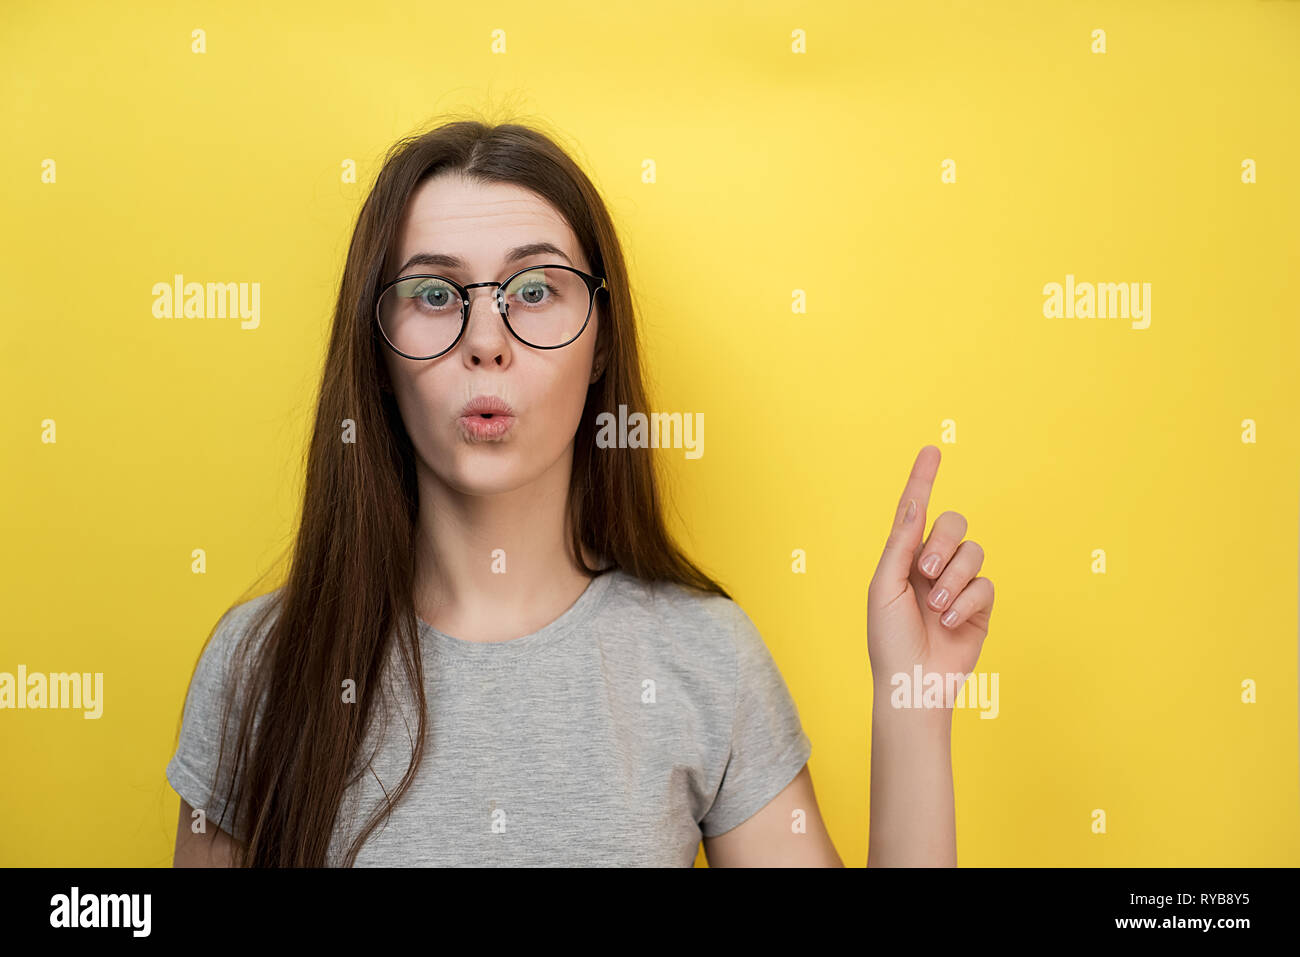 Surprised Caucasian young lady has bated breath, dressed in gray T-shirt, models against yellow background, demonstrates something at blank copy space Stock Photo